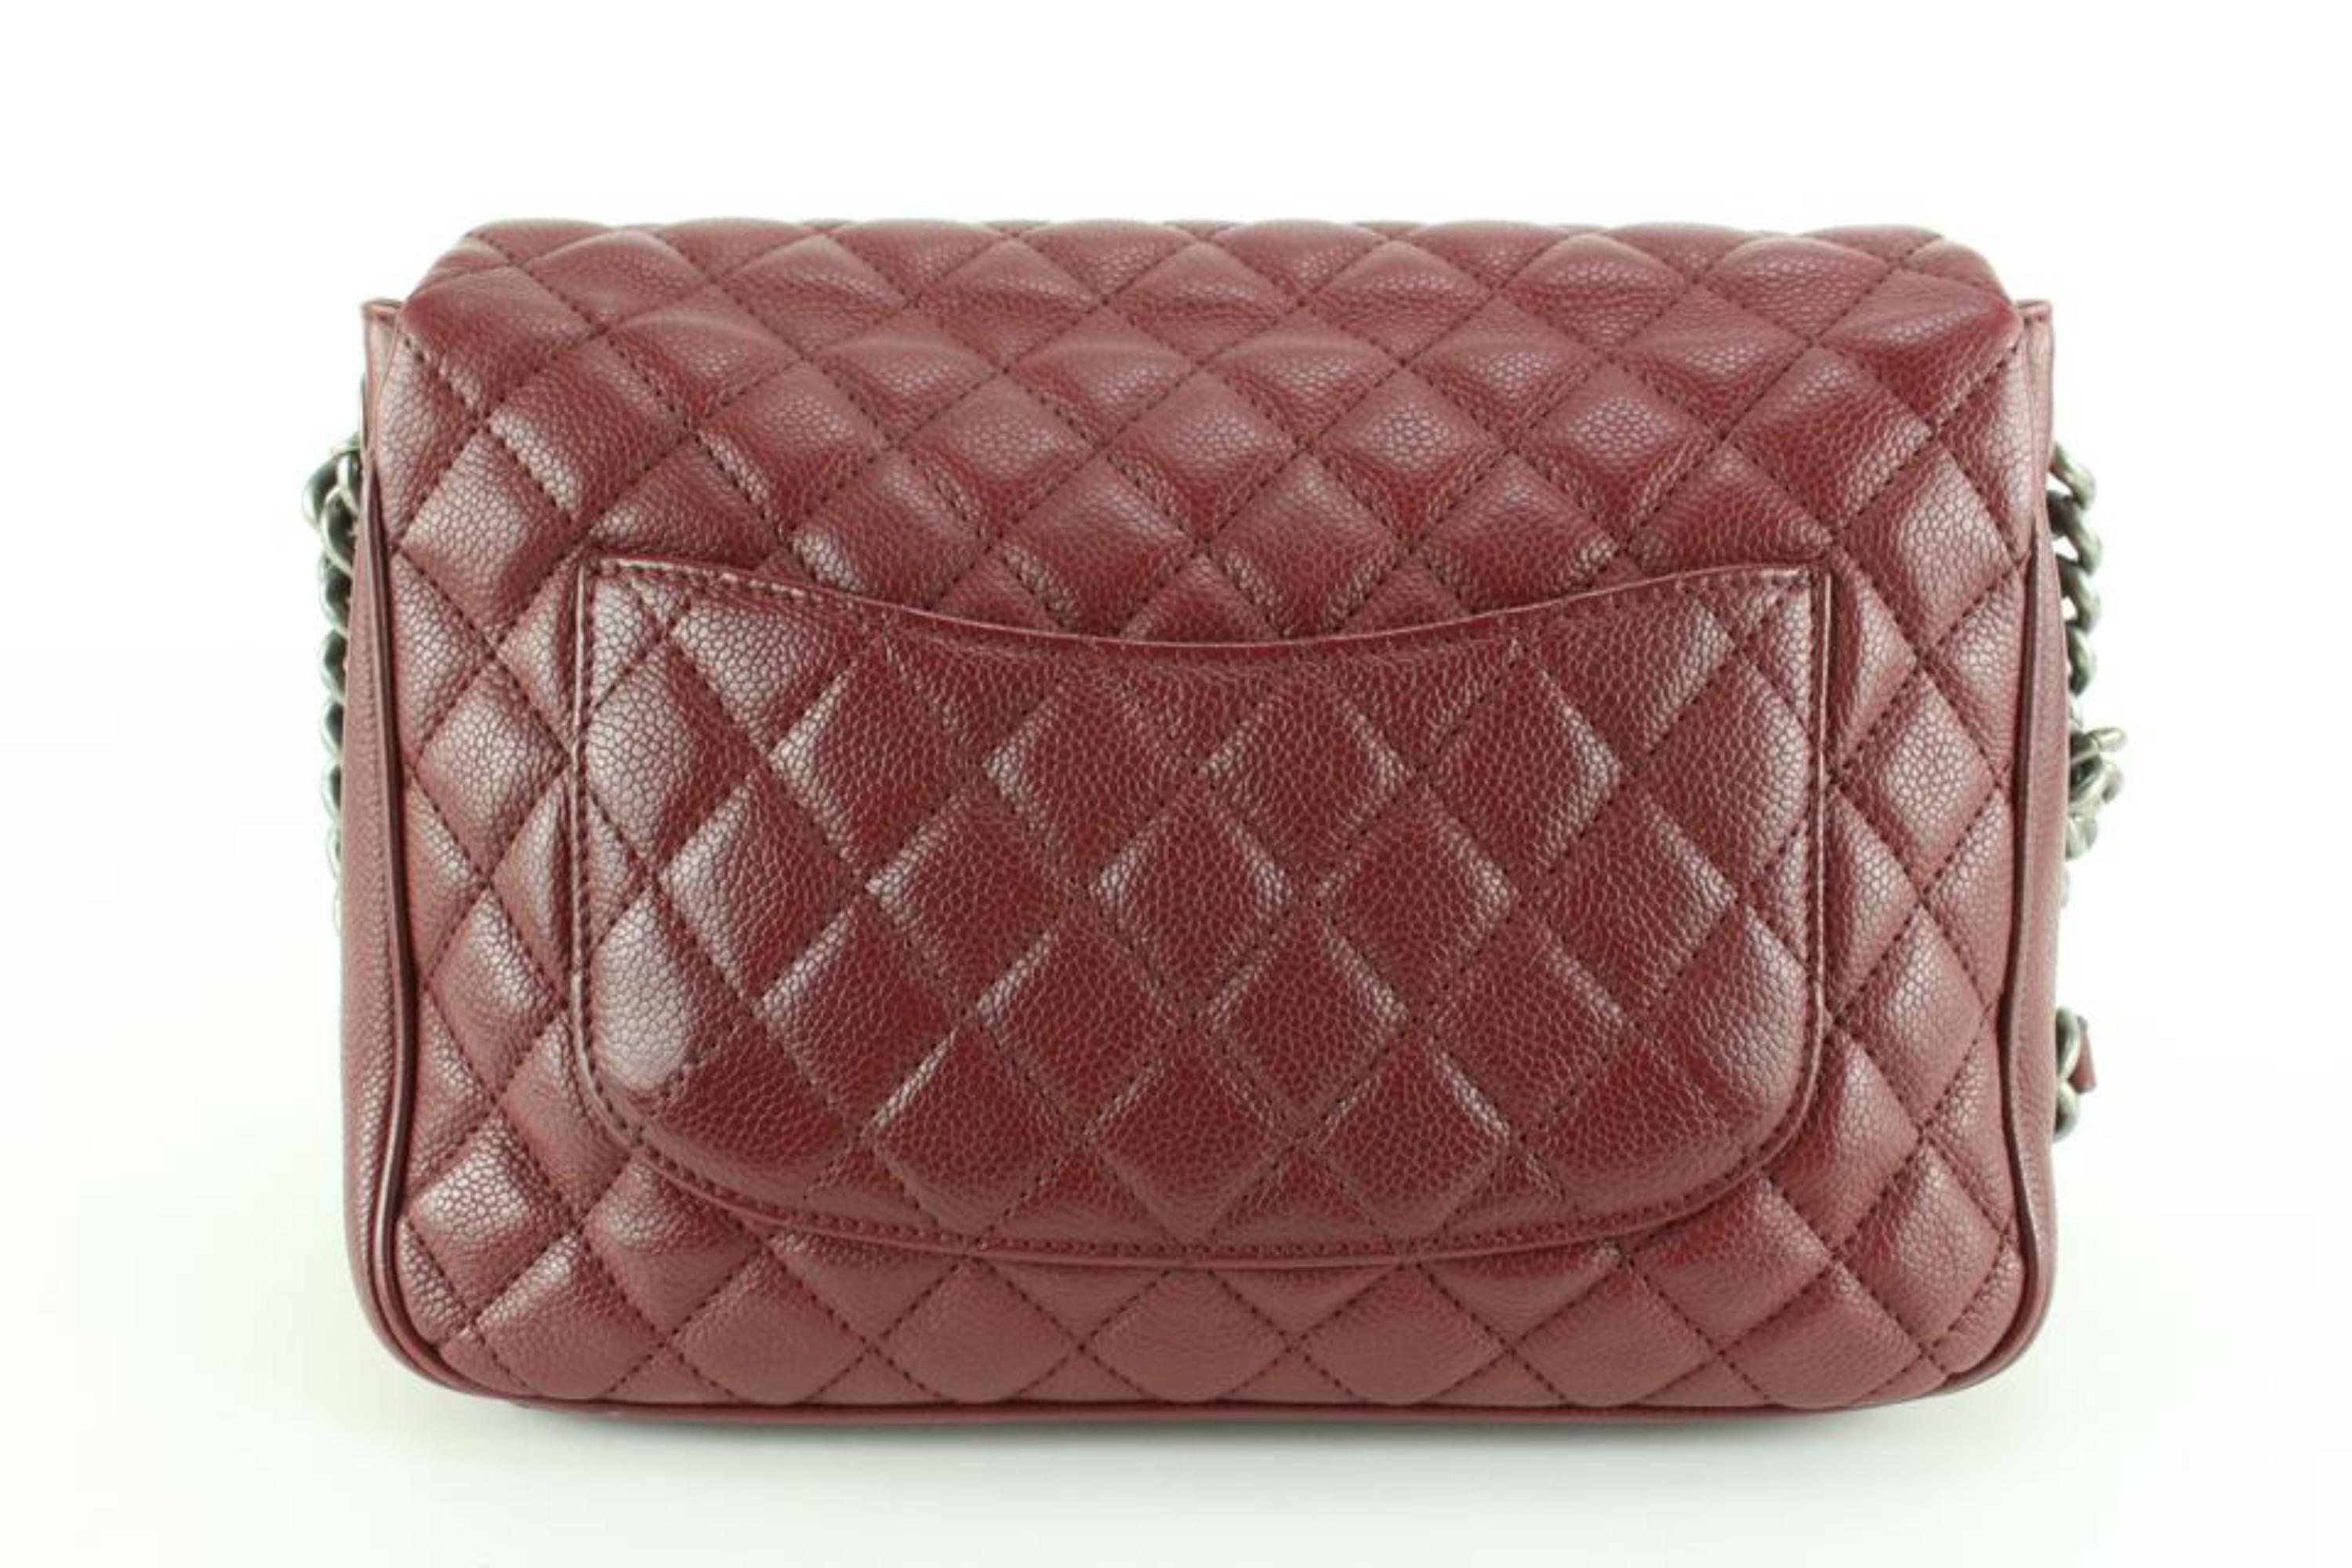 Chanel Dark Red Burgundy Quilted Caviar Leather Large Classic Flap 80cc825s 1